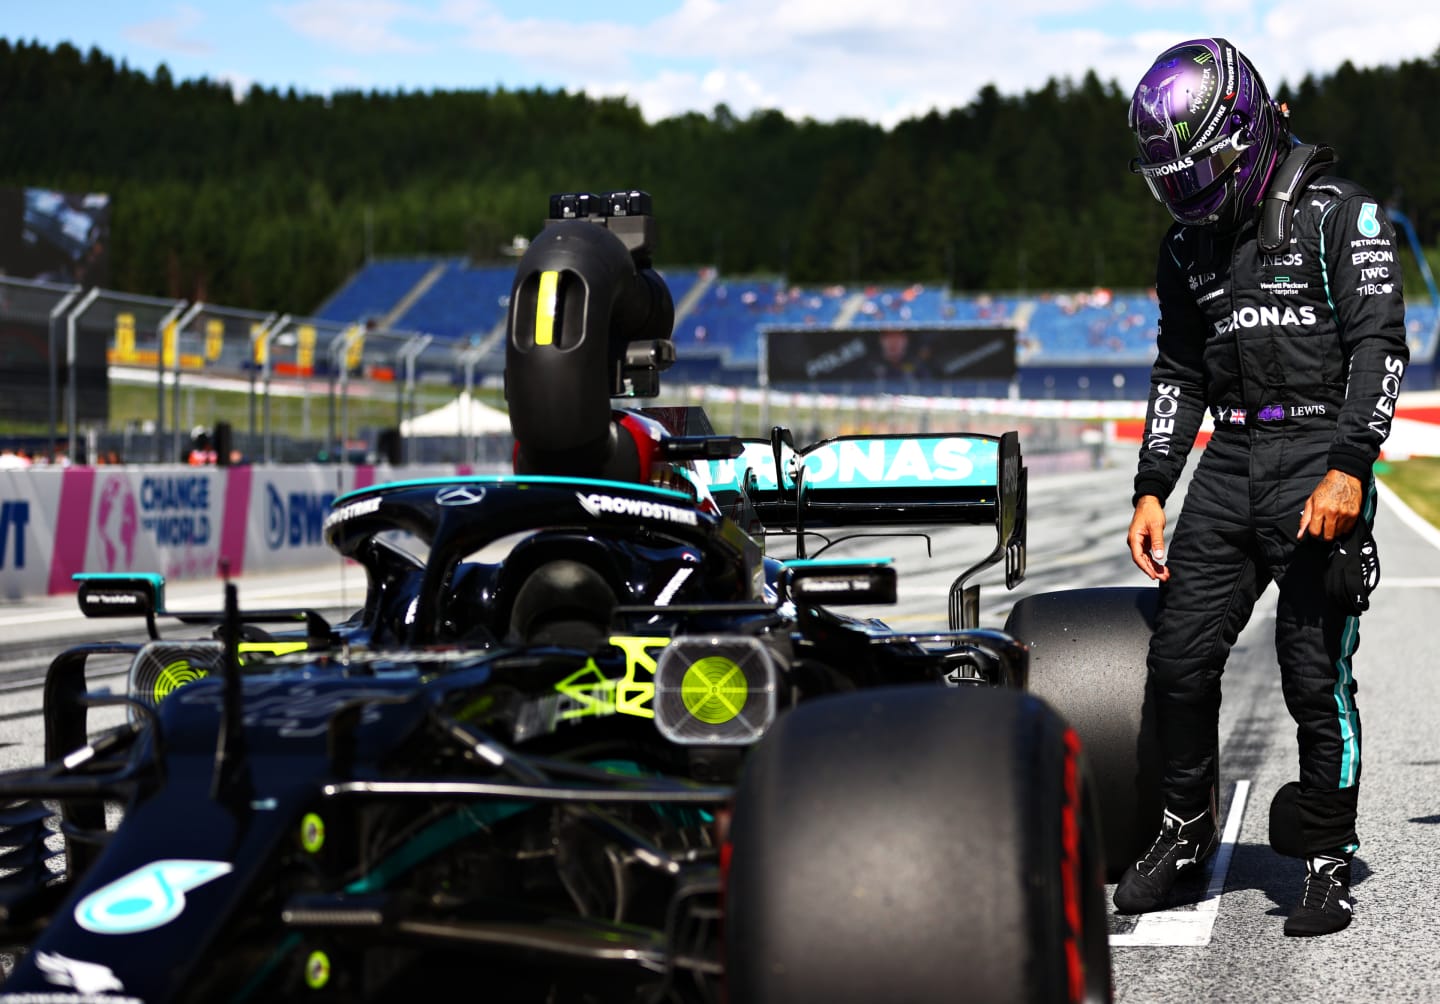 SPIELBERG, AUSTRIA - JUNE 26: Third place qualifier Lewis Hamilton of Great Britain and Mercedes GP inspects his car in parc ferme during qualifying ahead of the F1 Grand Prix of Styria at Red Bull Ring on June 26, 2021 in Spielberg, Austria. (Photo by Dan Istitene - Formula 1/Formula 1 via Getty Images)